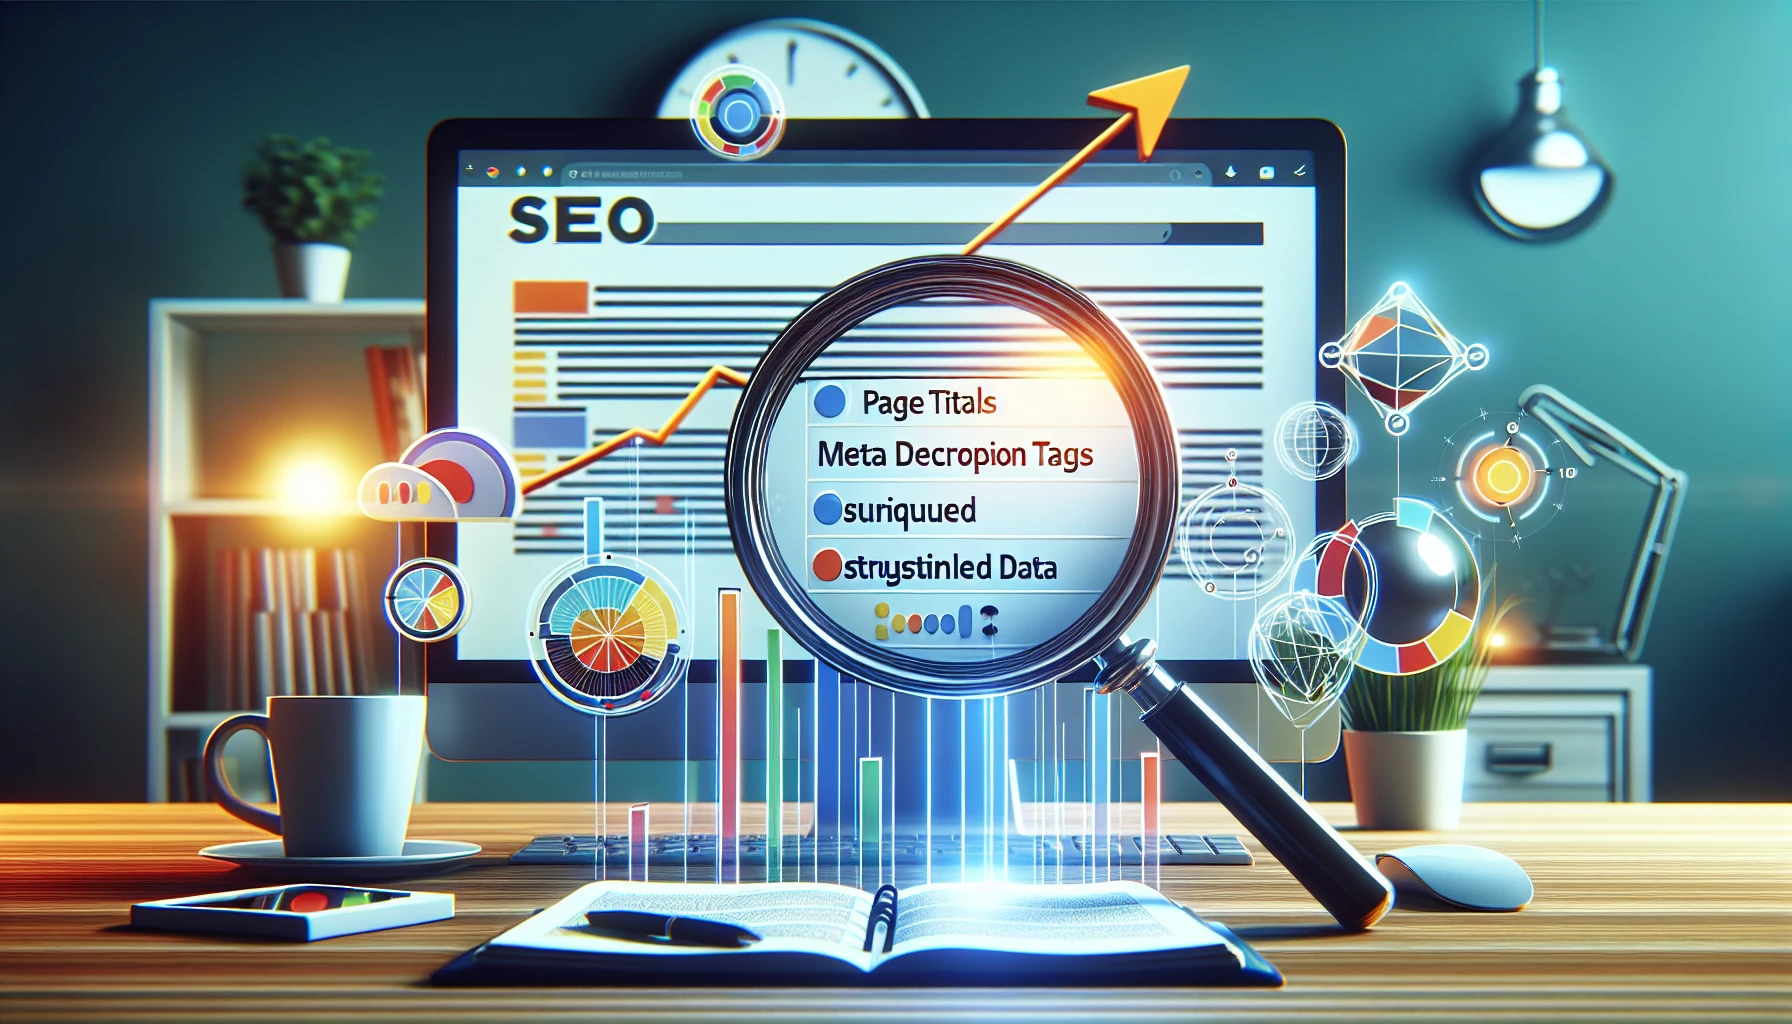 Illustration of SEO best practices